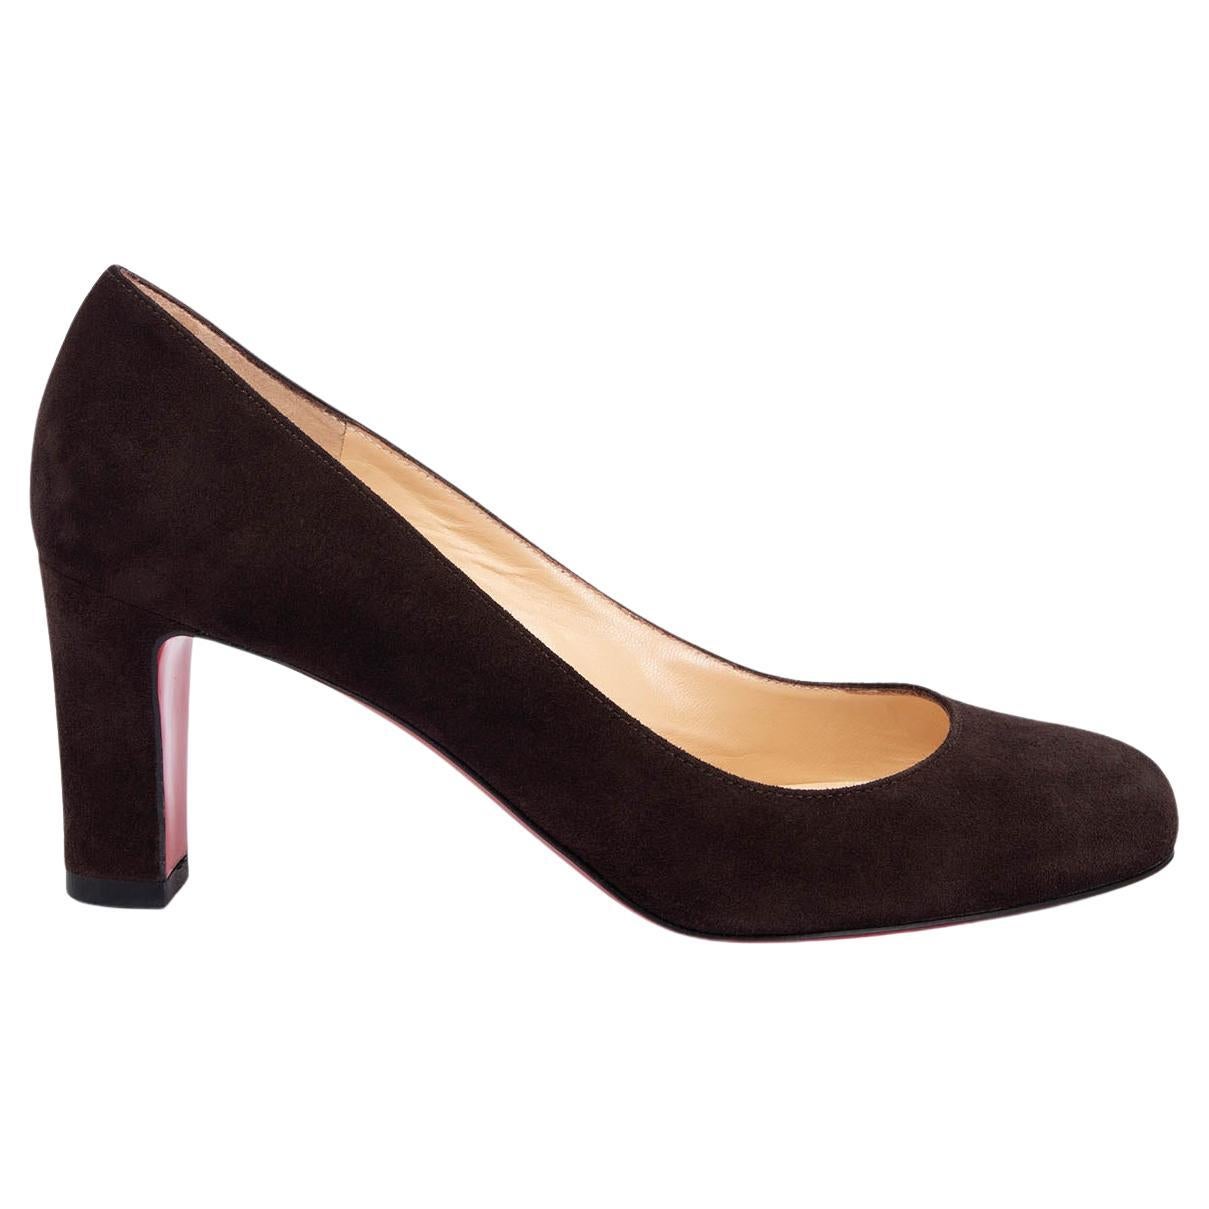 CHRISTIAN LOUBOUTIN dark brown suede ROUND TOE Pumps Shoes 36.5 For Sale